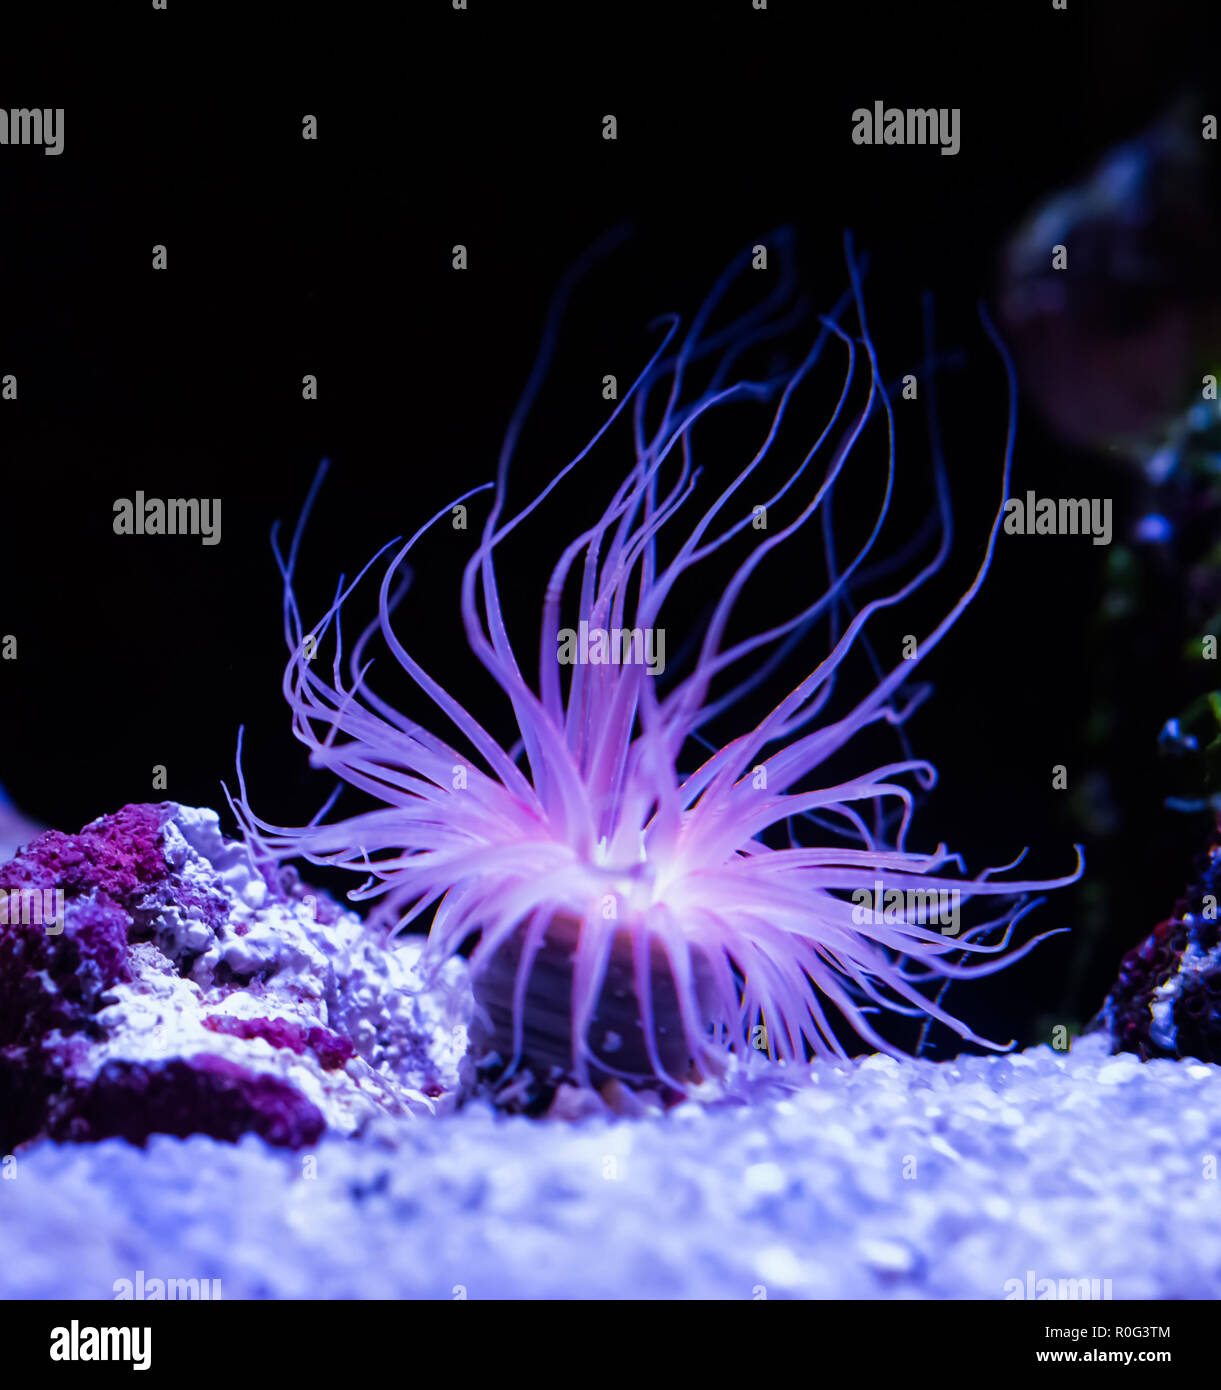 beautiful sea anemone lighting up in purple blue and pink vibrant colors  aquatic underwater ocean animal plant Stock Photo - Alamy